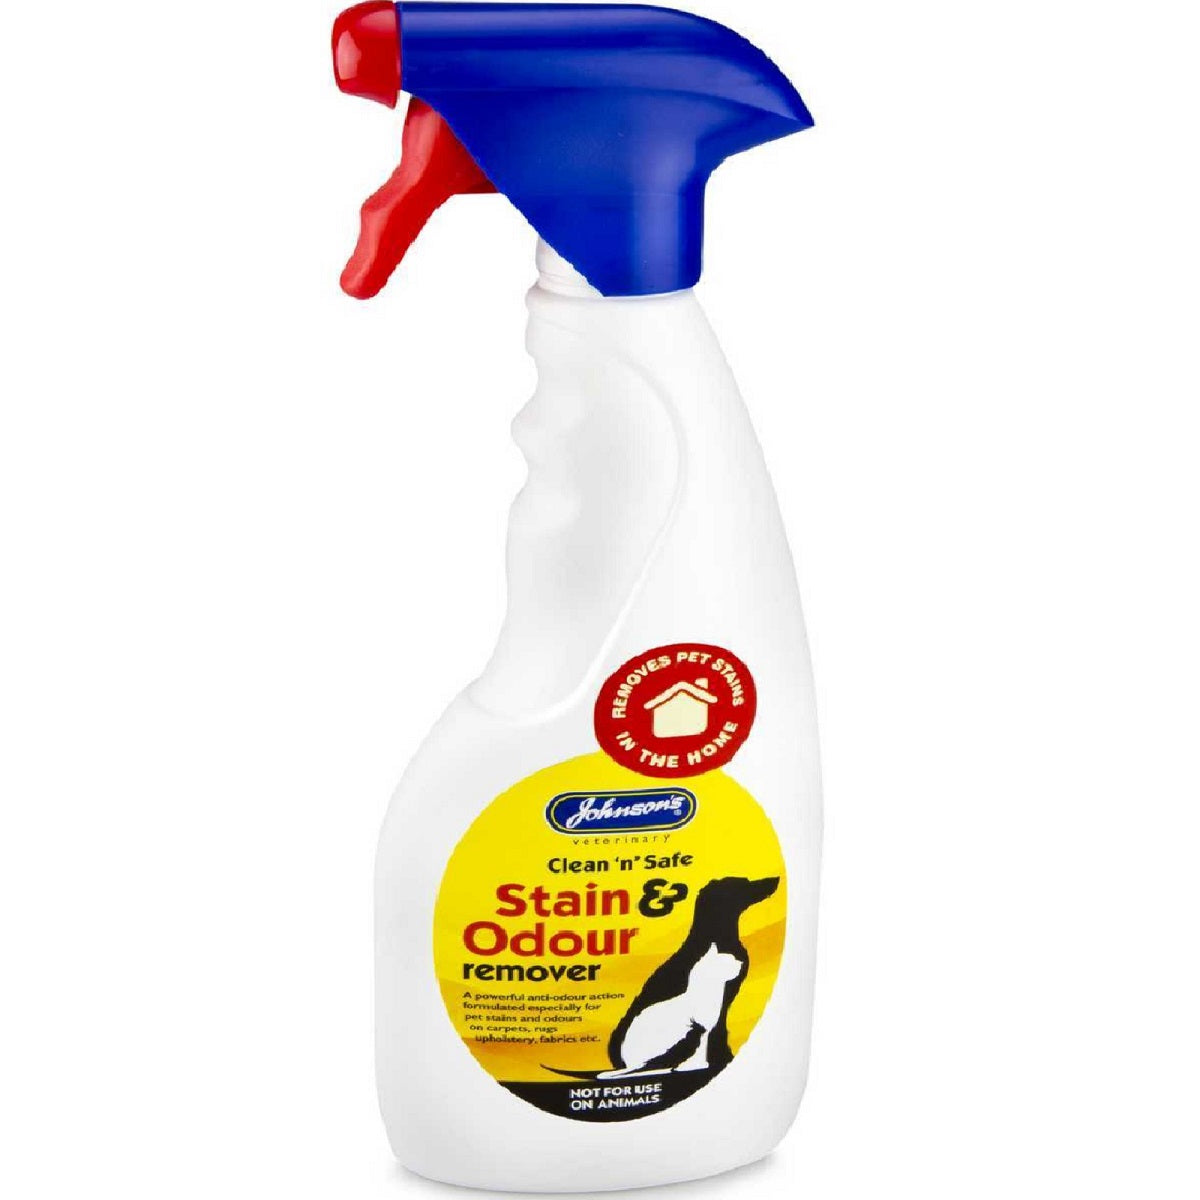 Johnsons - Clean 'n' Safe Stain & Odour Remover Spray (500ml)